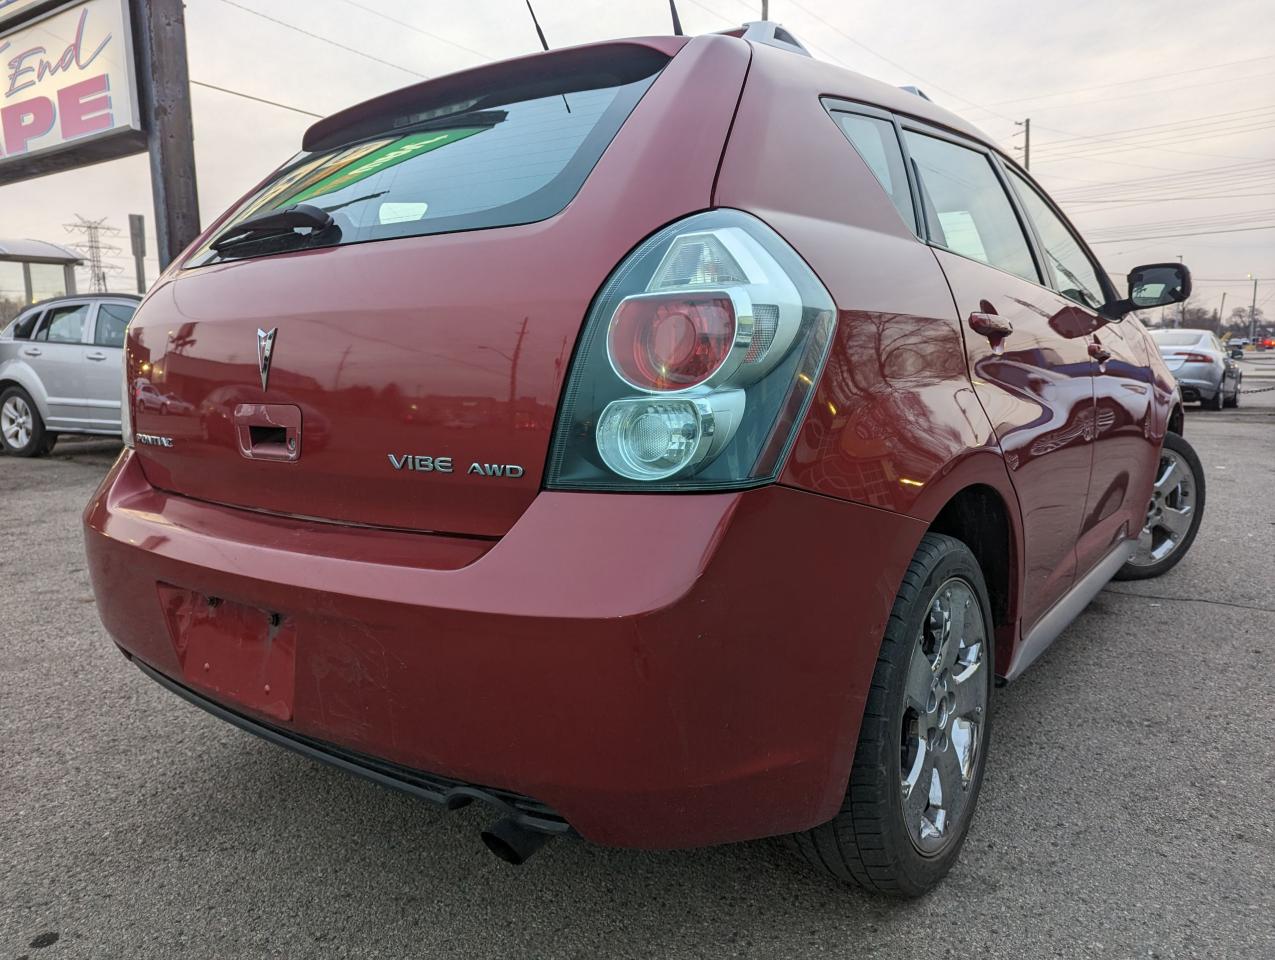 2009 Pontiac Vibe AWD *Drives Excellent/Free Winter Tires On Rims* - Photo #9